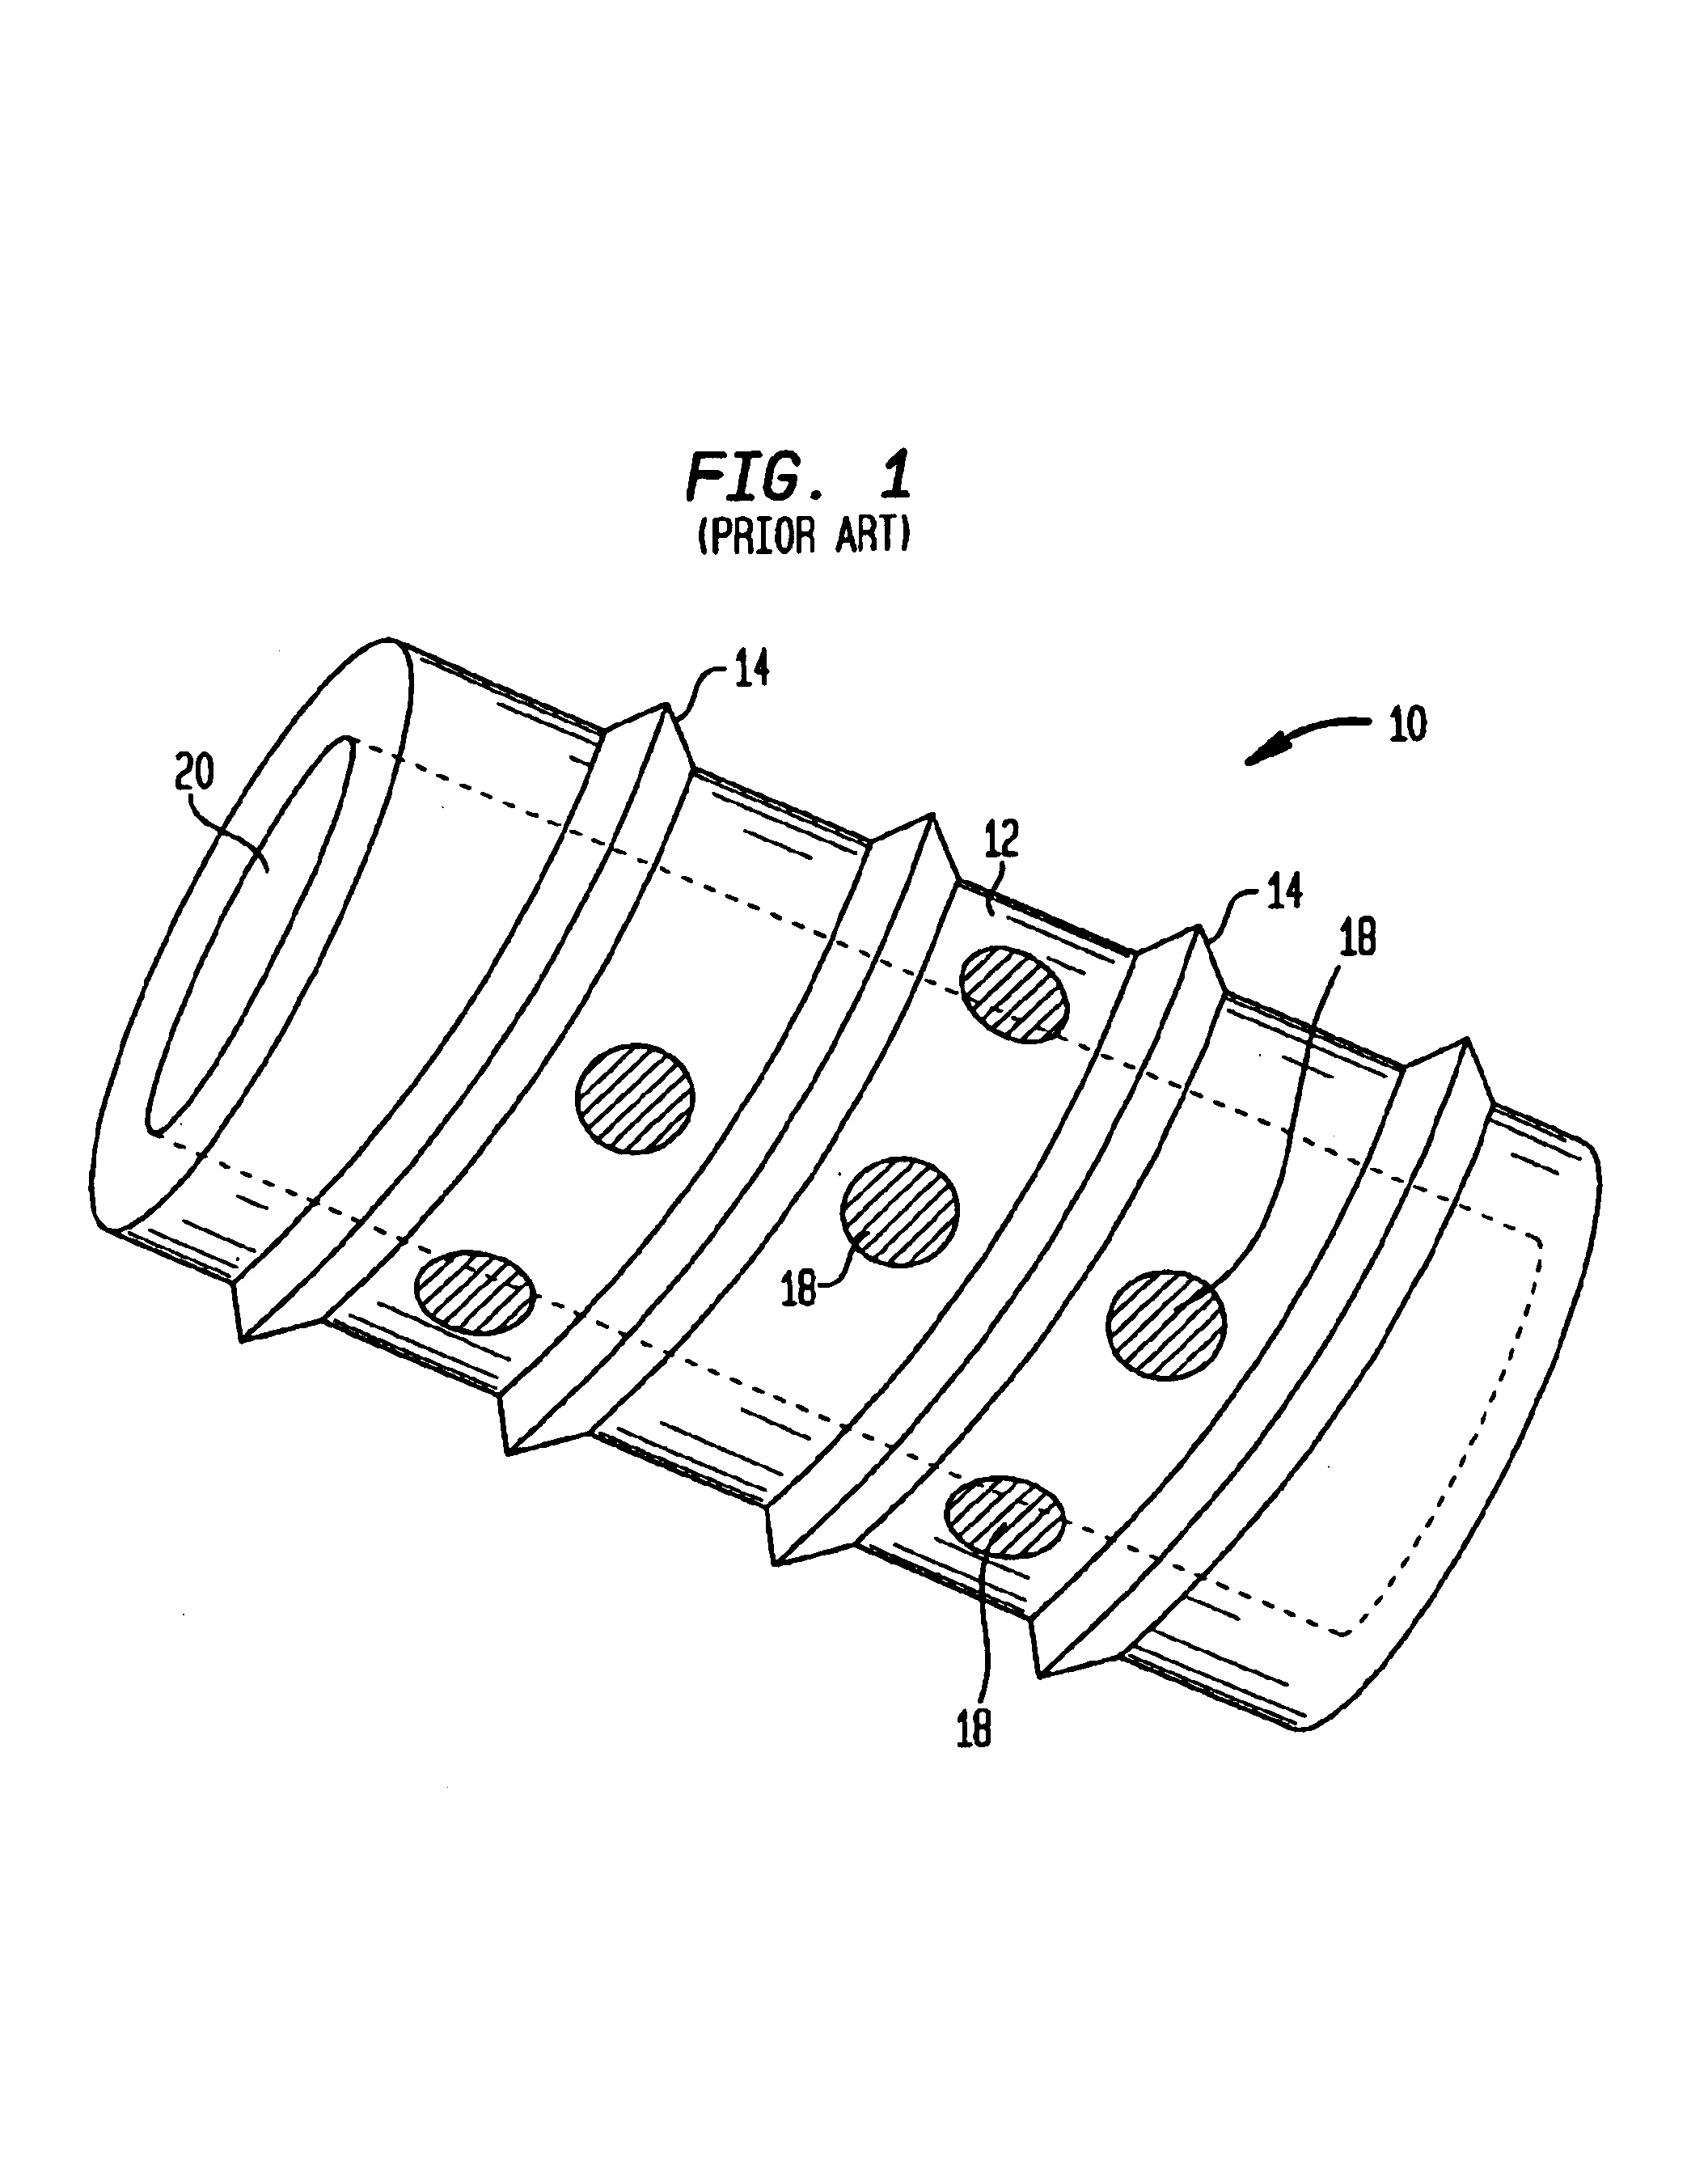 Intervertebral spacer device utilizing a belleville washer having radially spaced concentric grooves